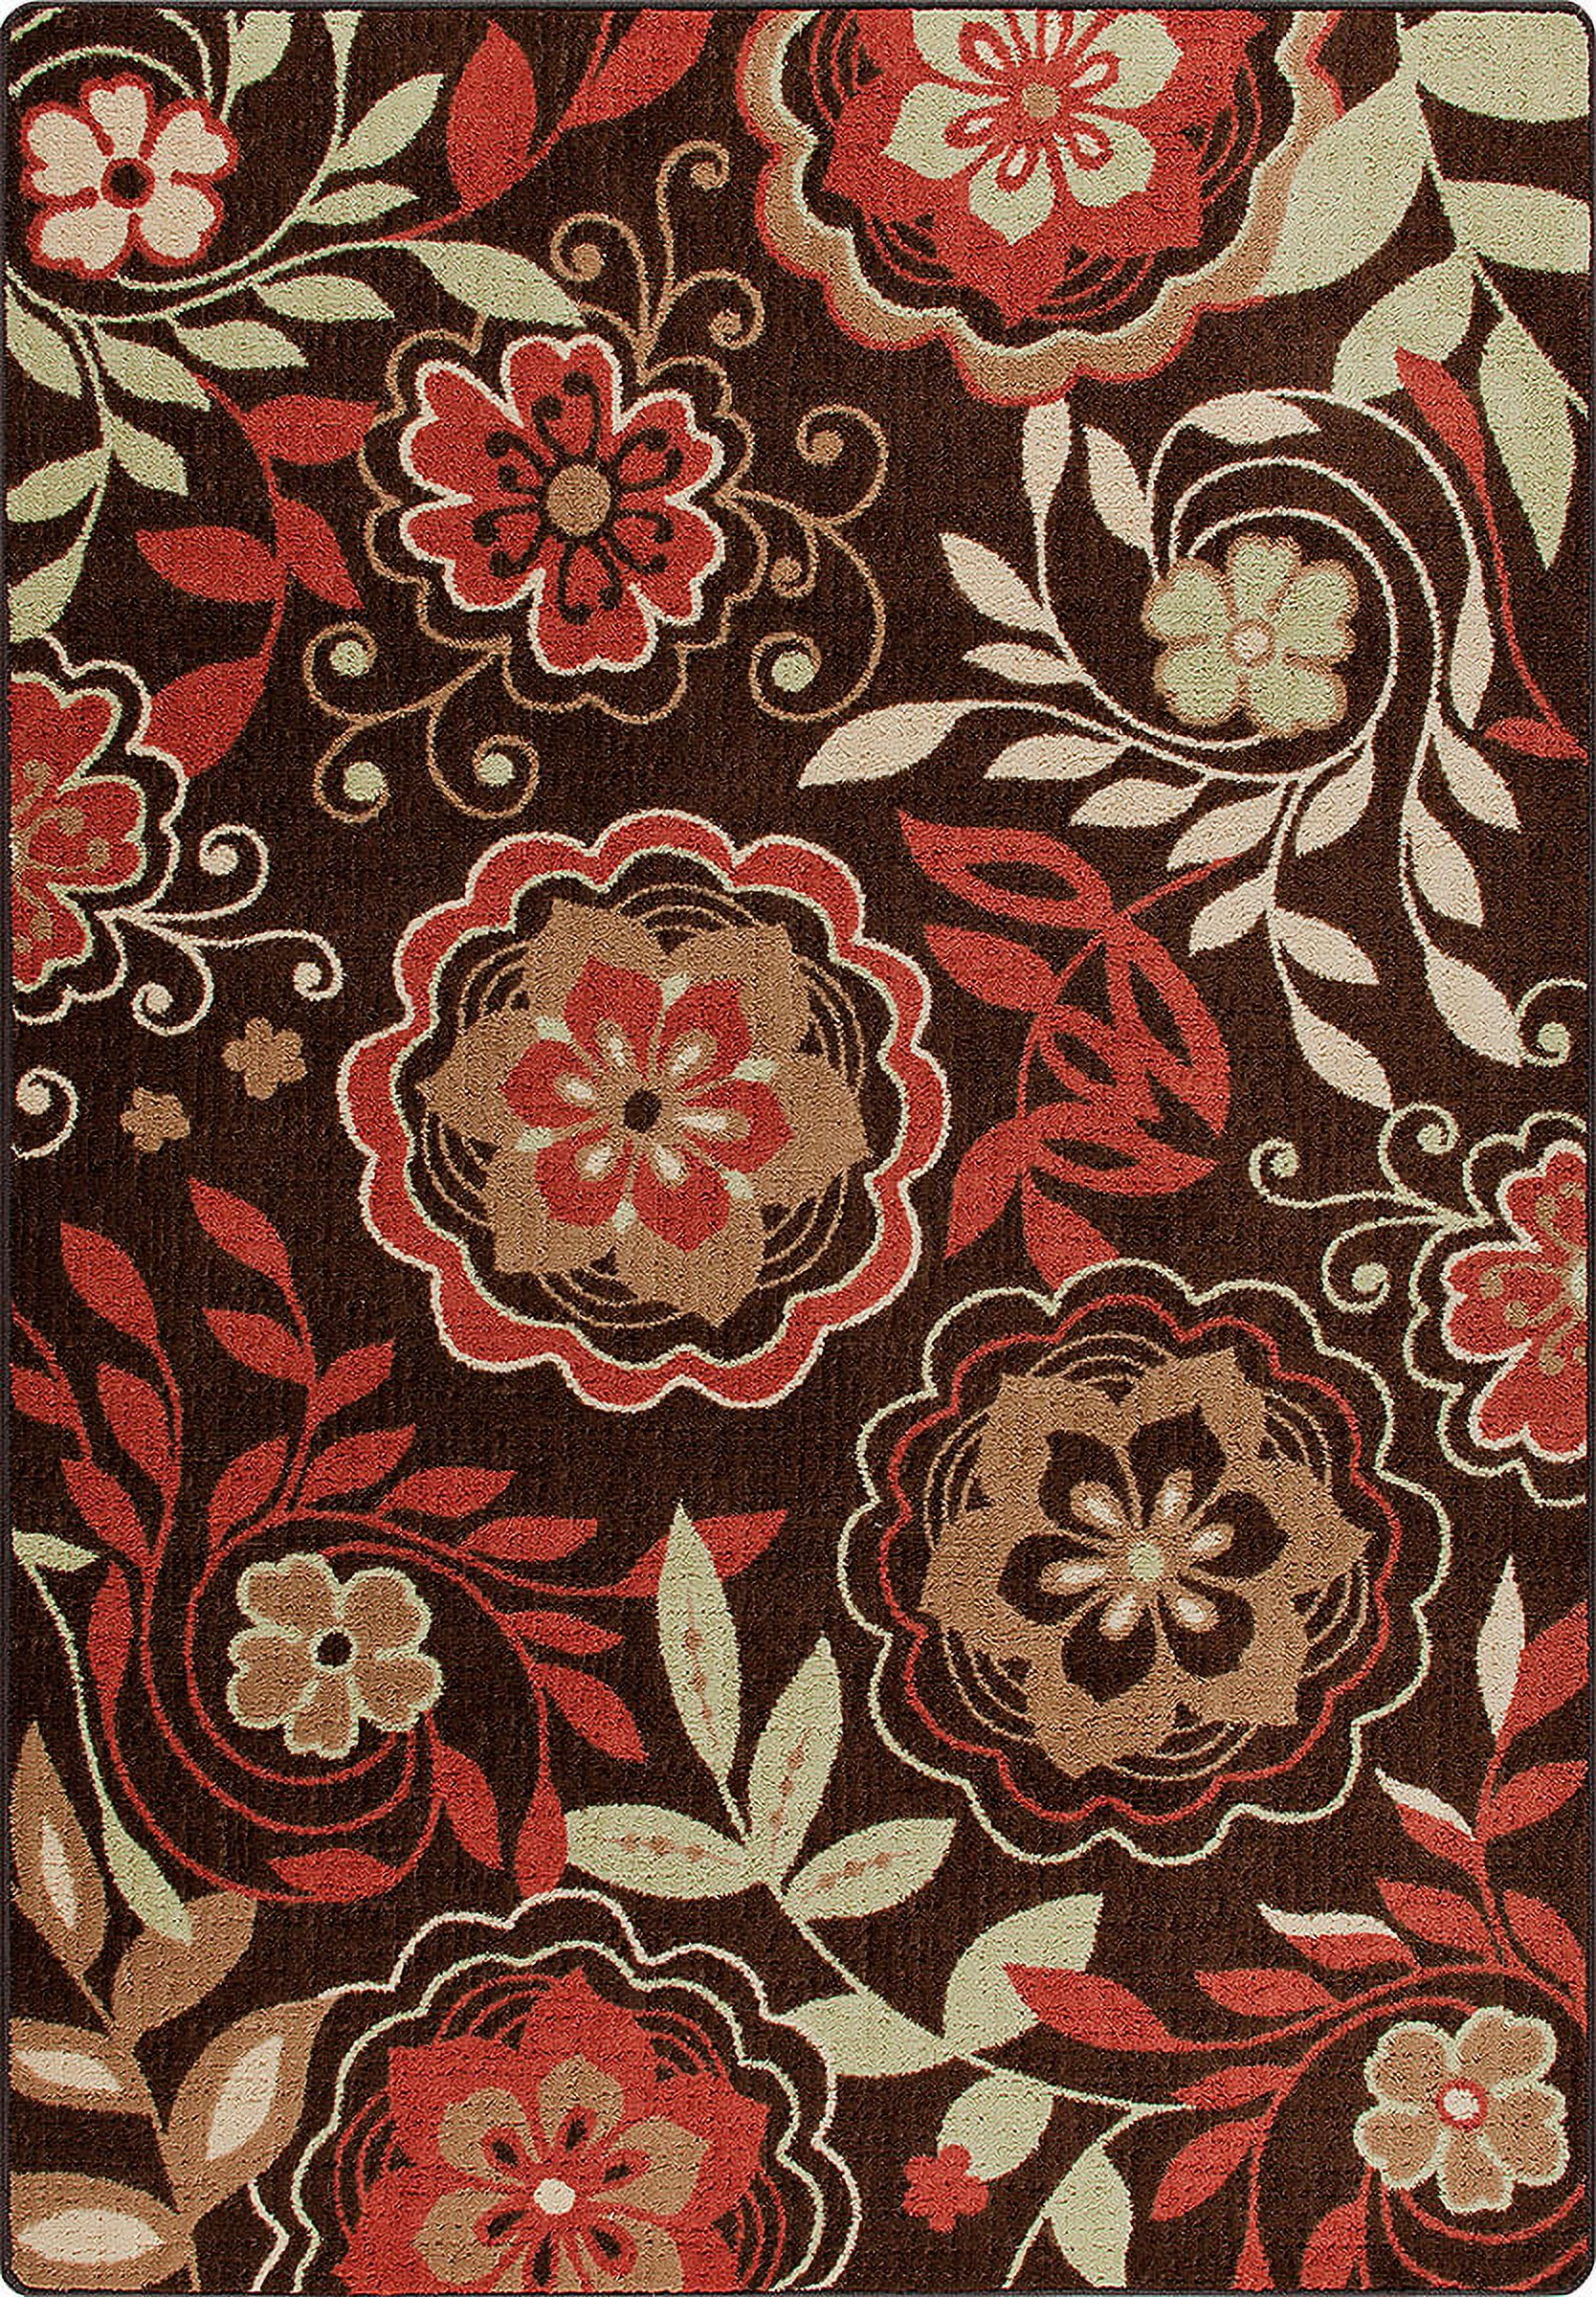 Milliken Mix & Mingle Area Rug Garden Passage Native Red Stainmaster Flower 5' 4" x 7' 8" Rectangle - image 1 of 1